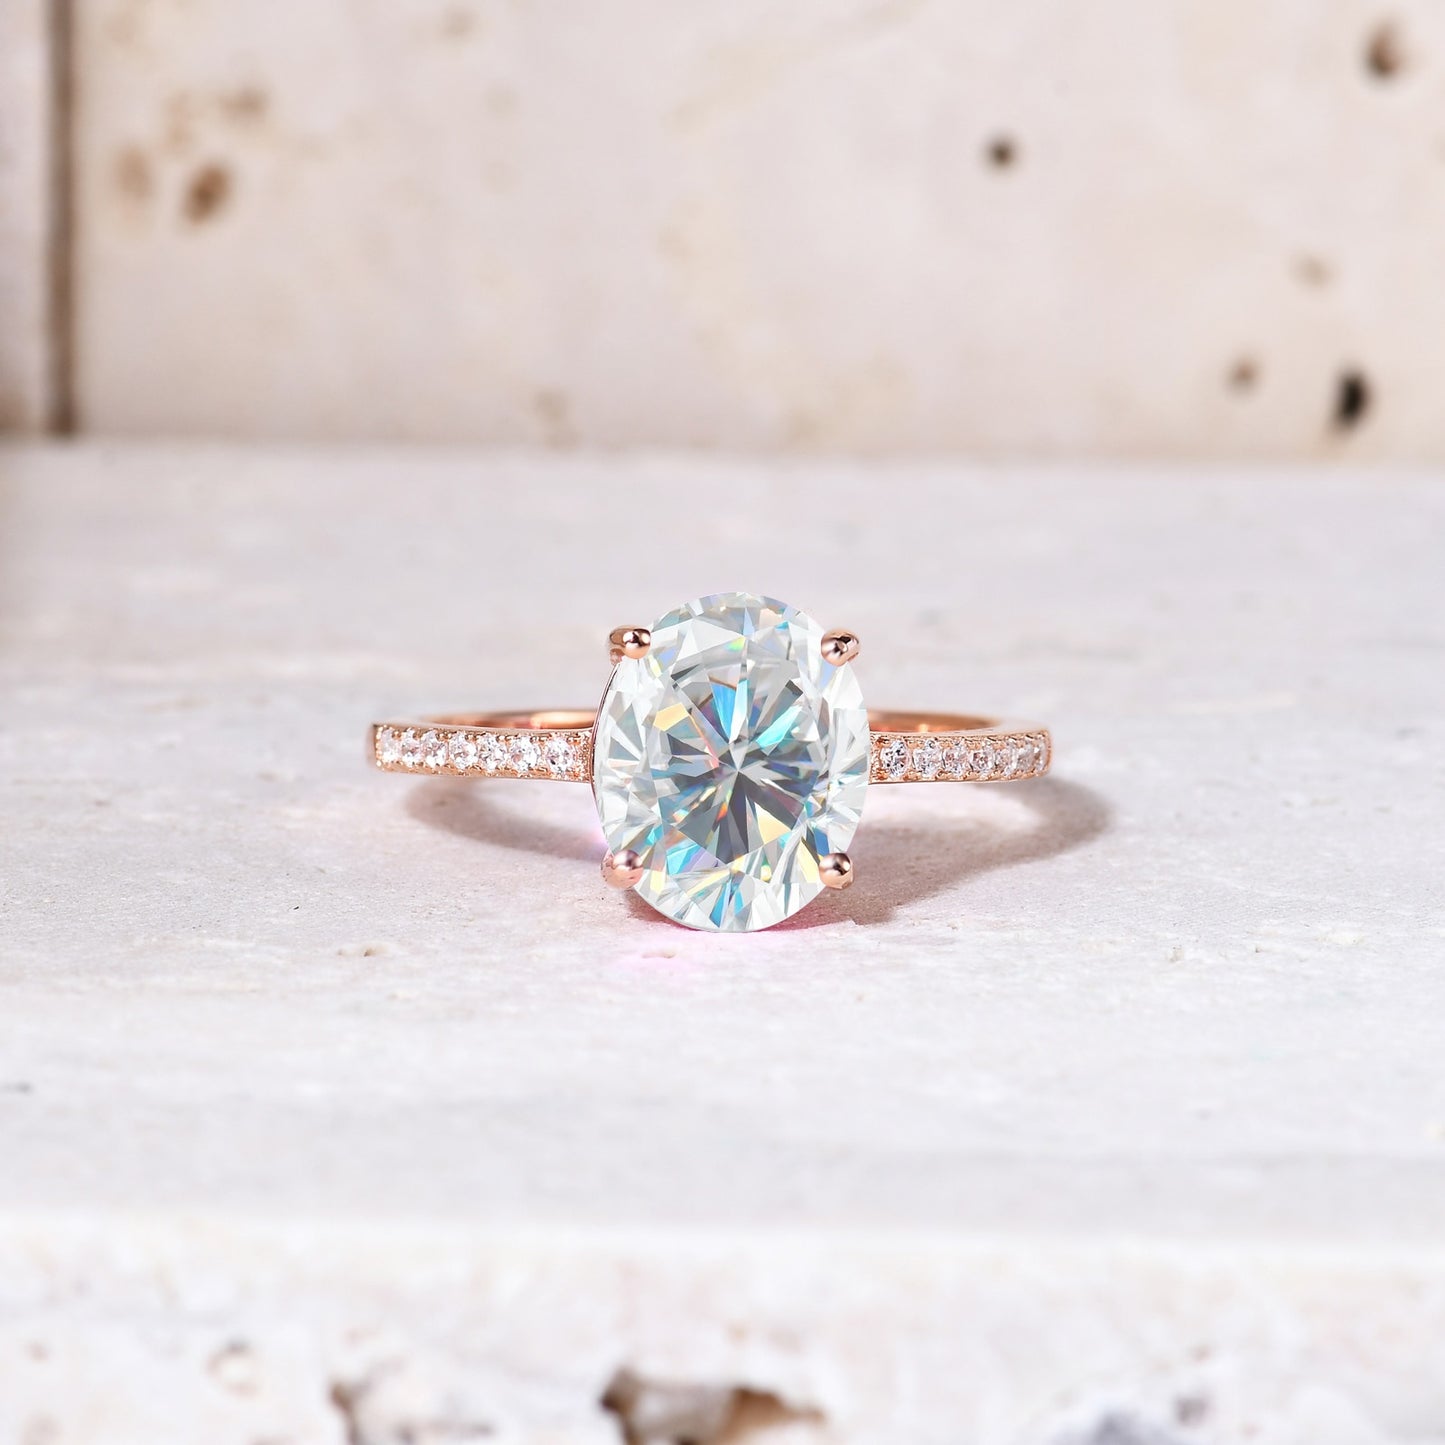 A rose gold pave band with moon and star cut outs on each side, set with a 3CT oval moissanite.